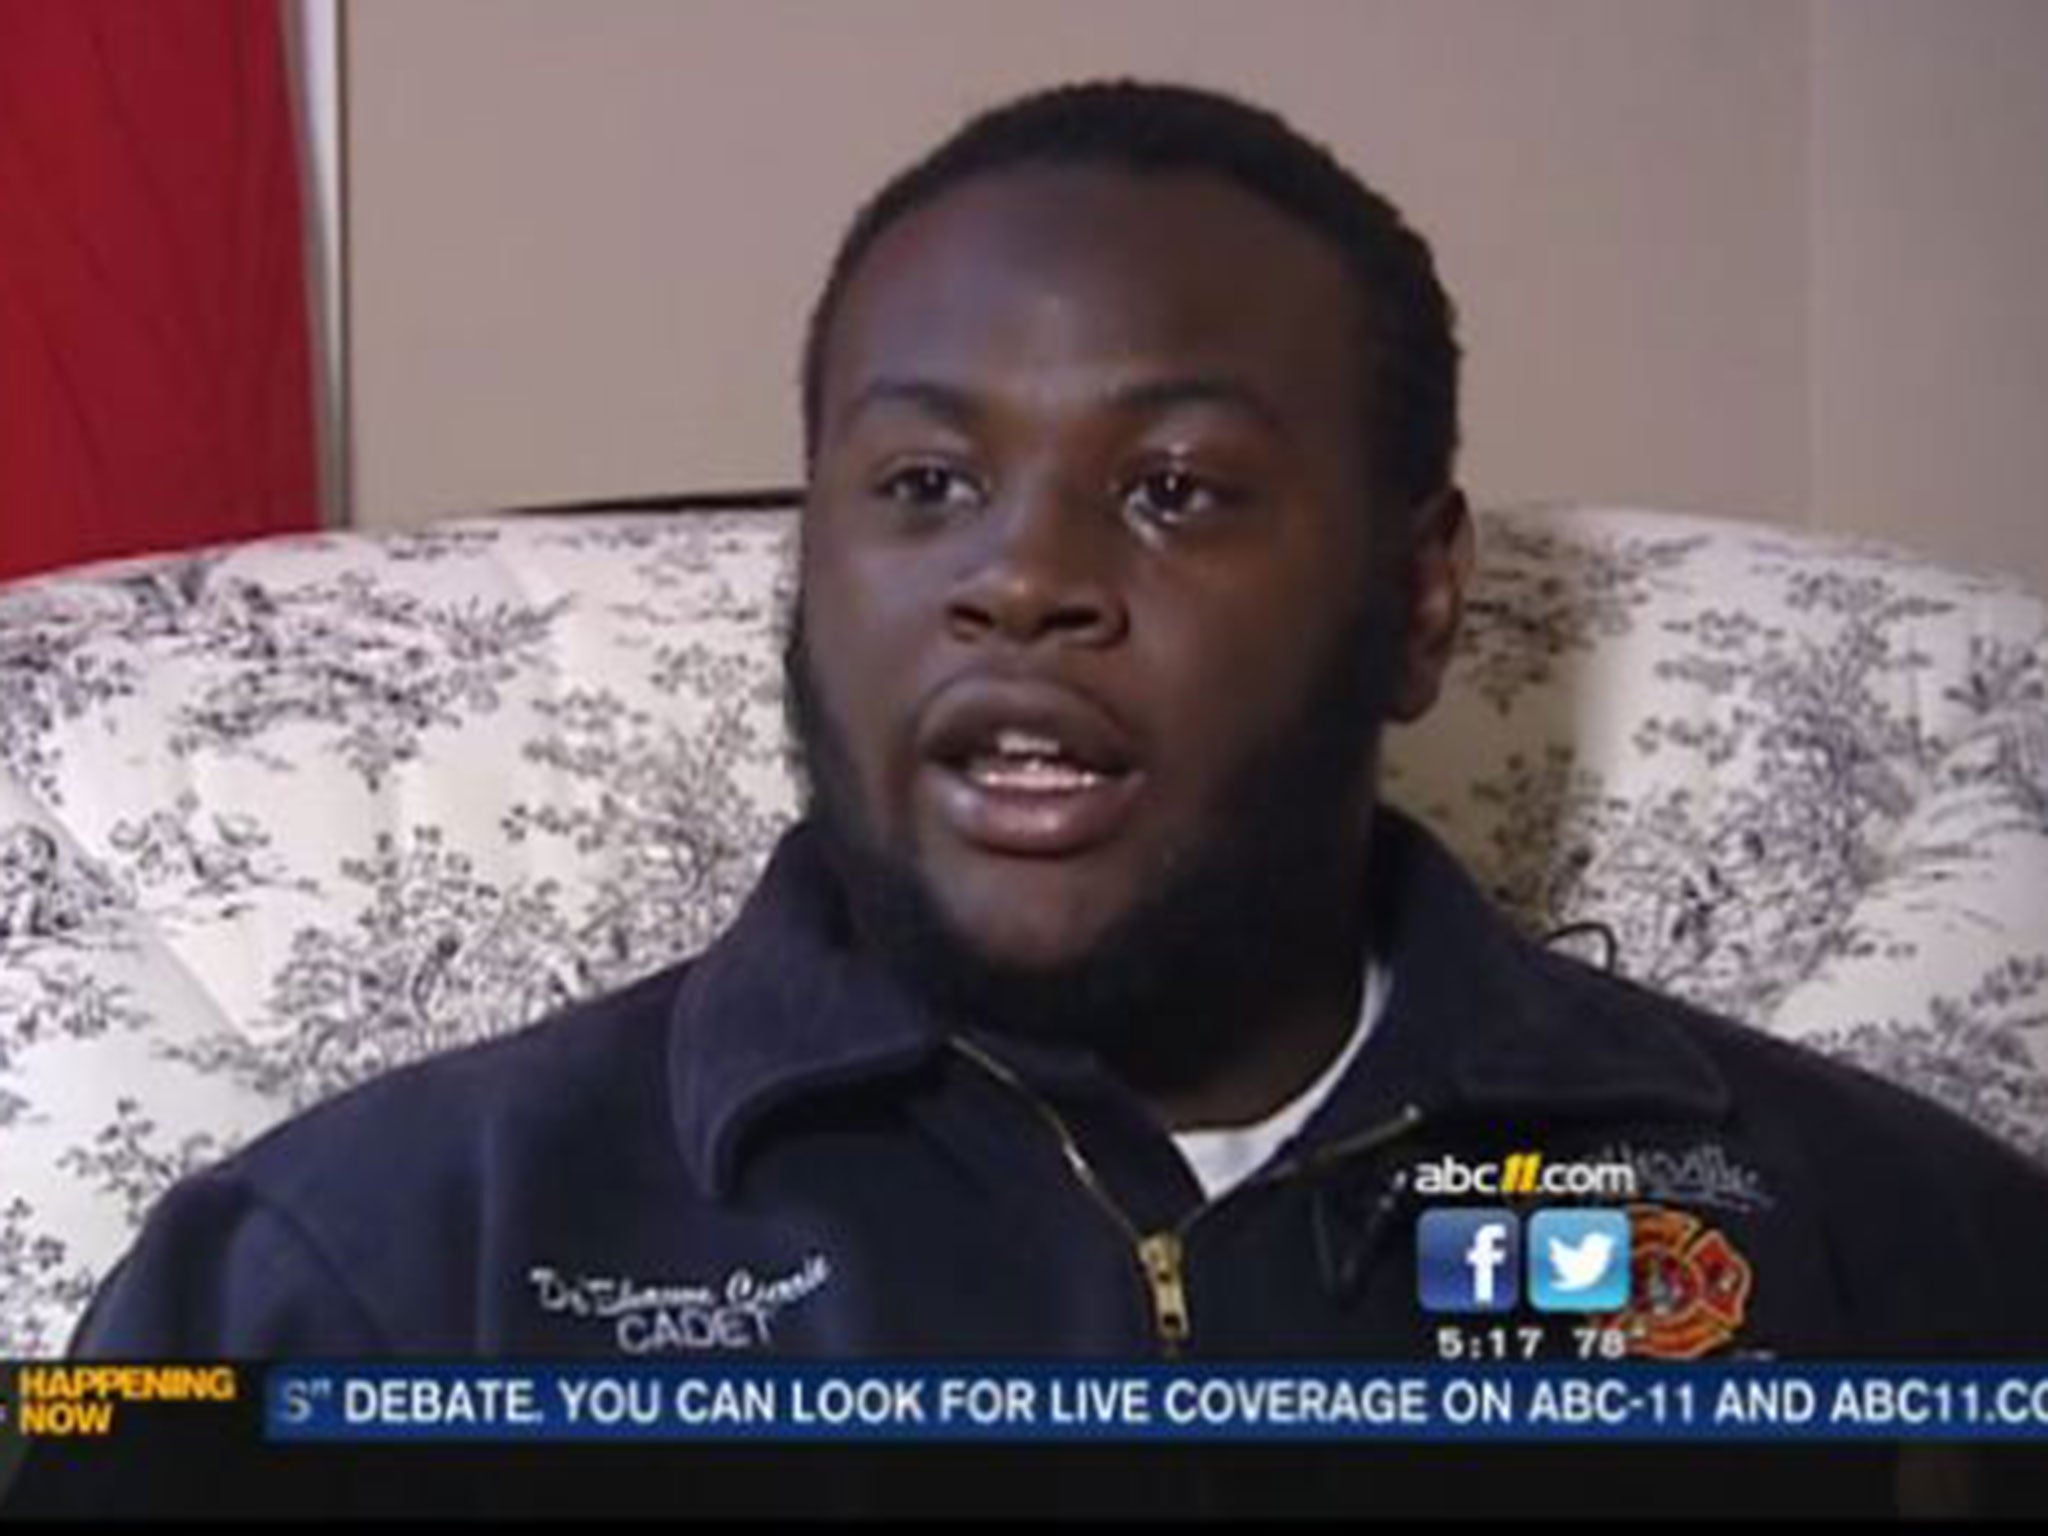 DeShawn Currie was pepper-sprayed in the home of his white foster family after police mistook him for a burglar